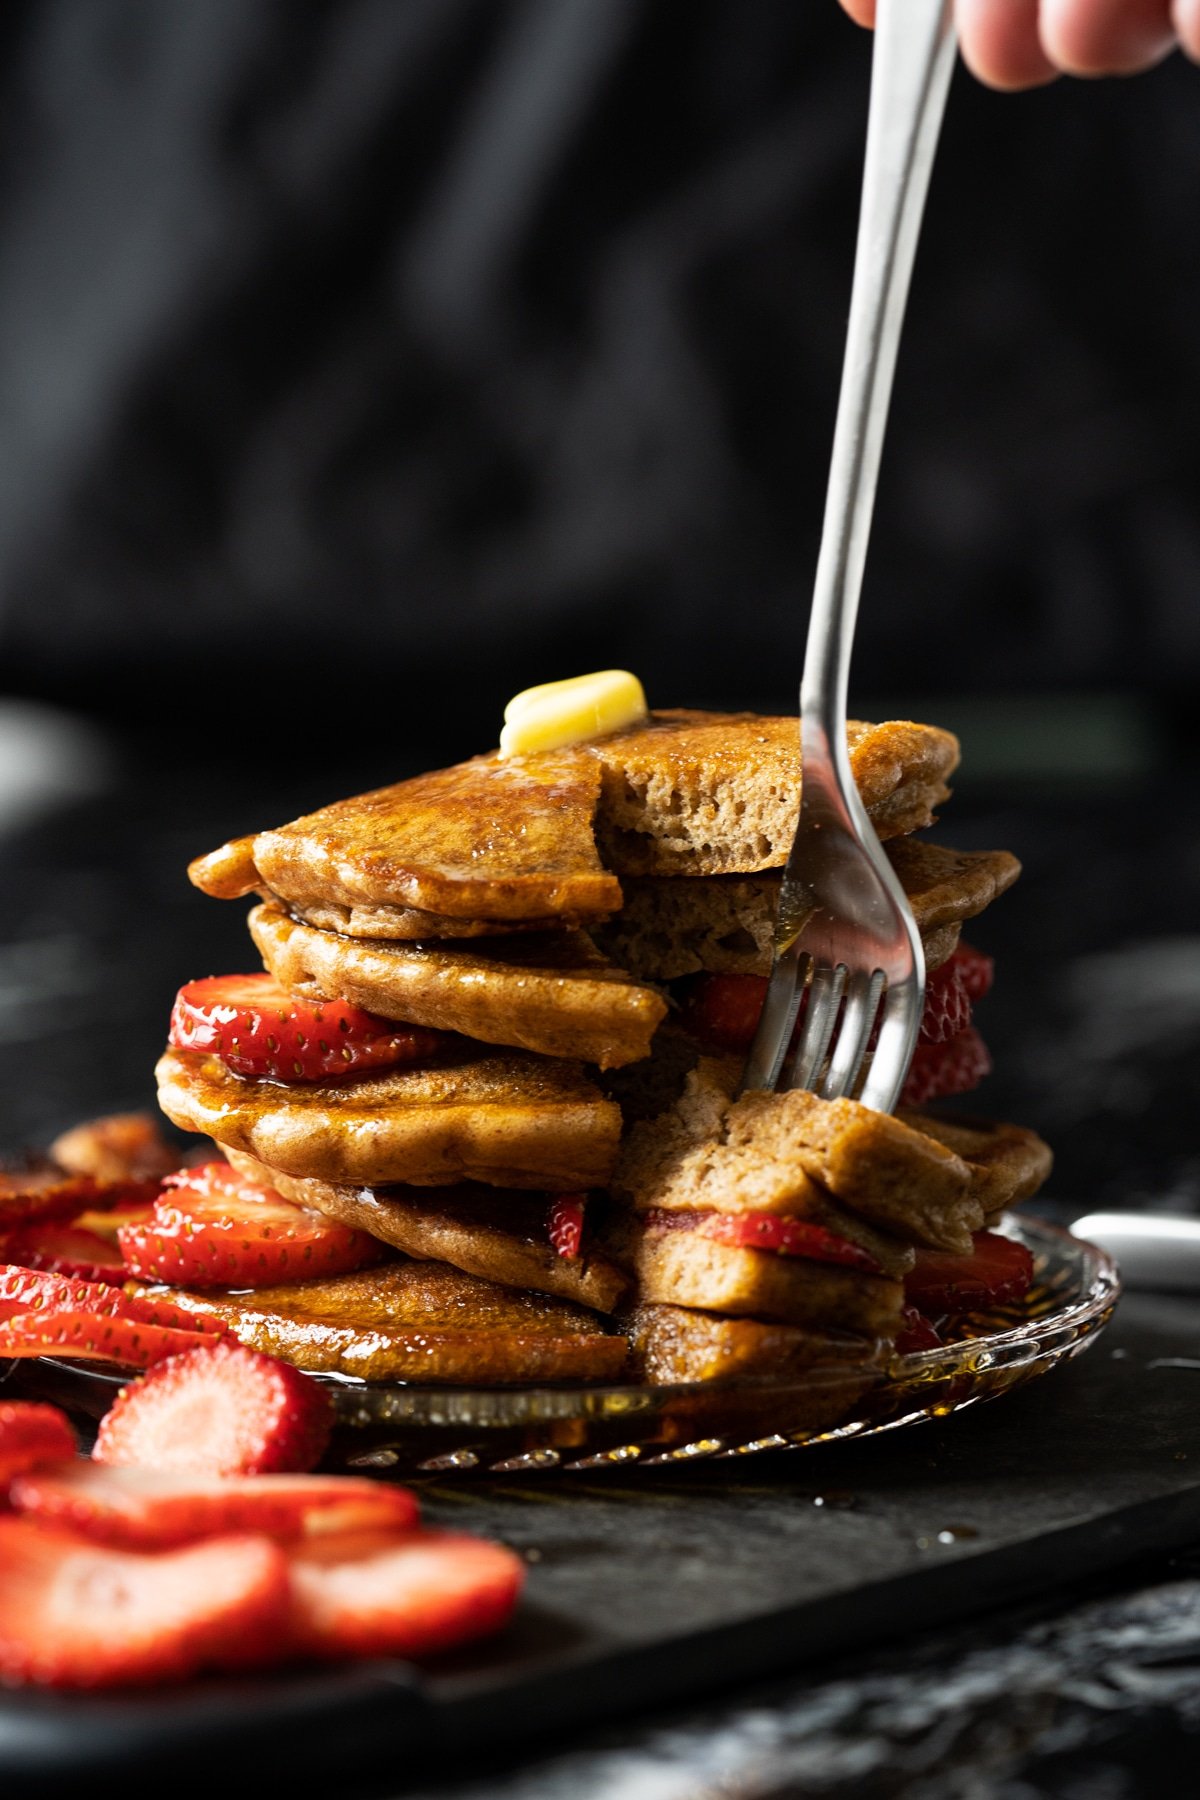 A slicked stack of flourless keto pancakes showing their fluffy texture